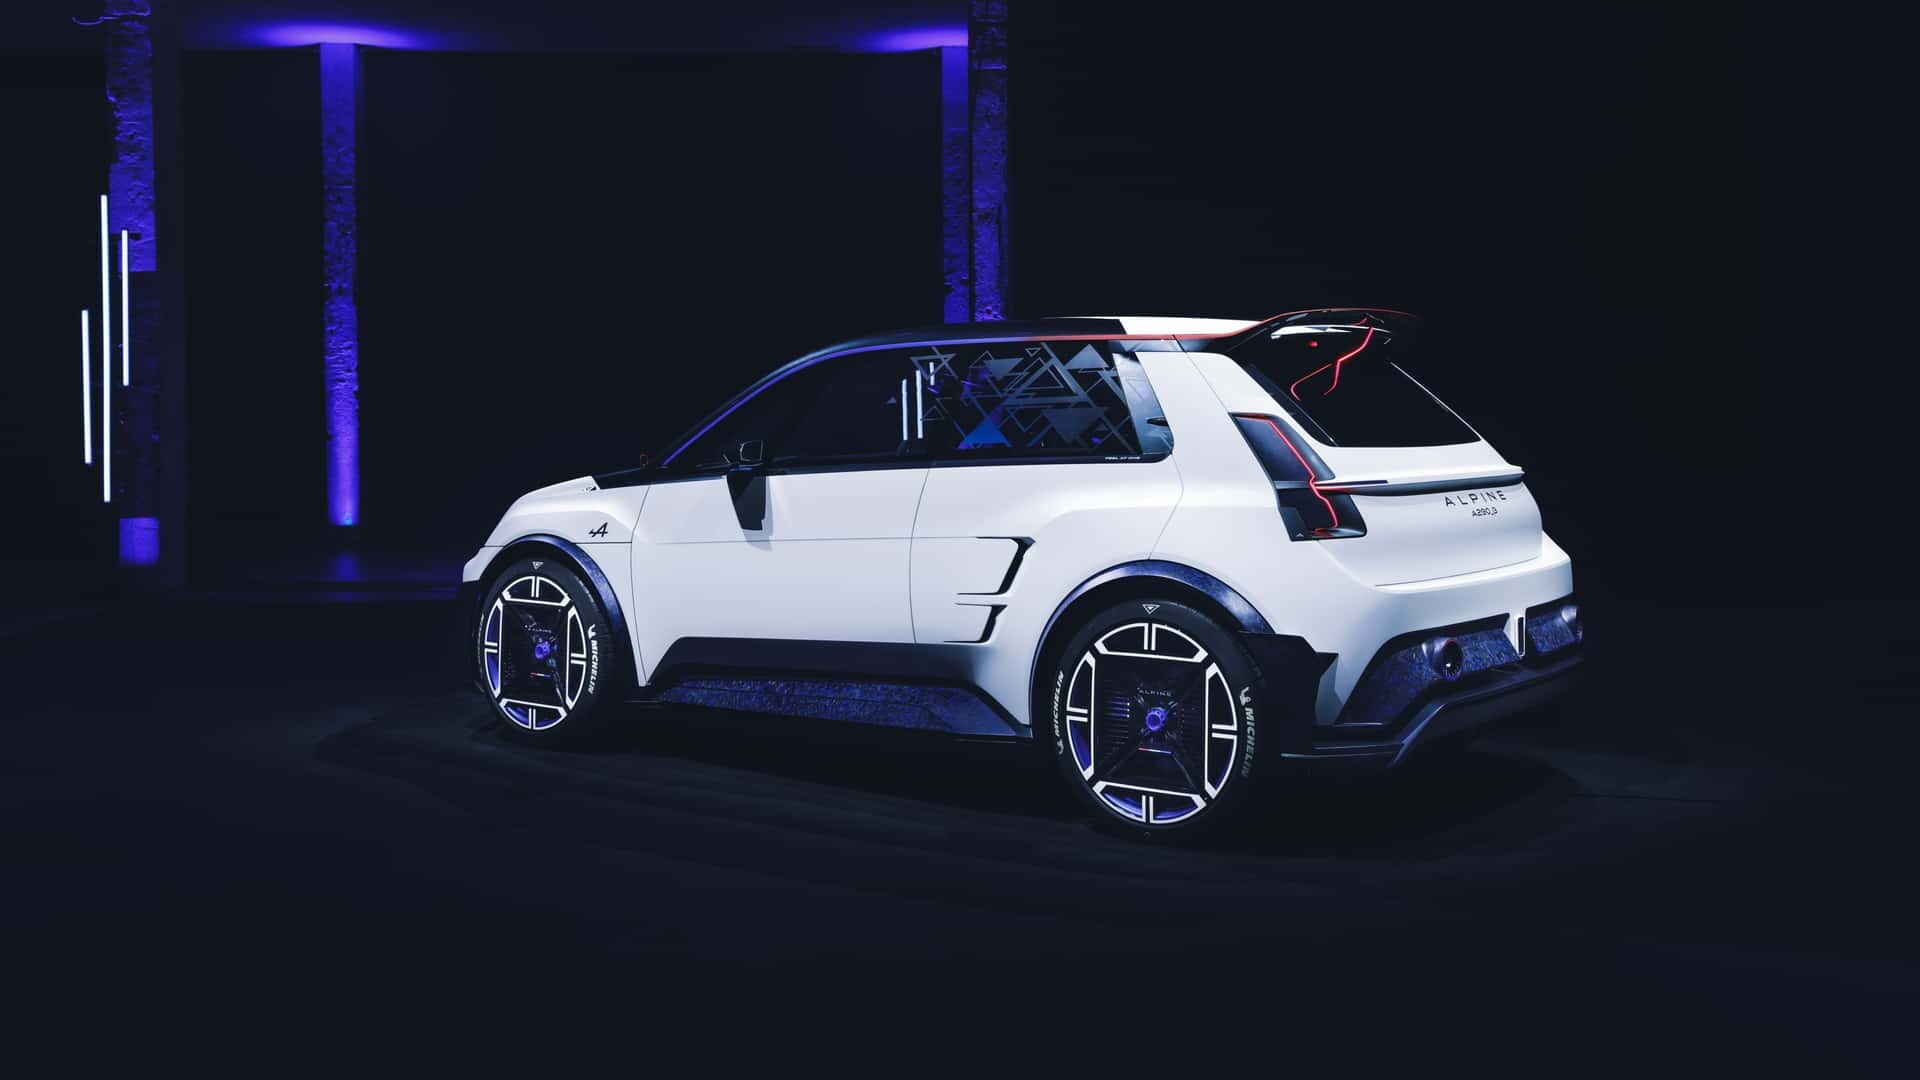 The Renault 5 hatchback (aka the Le Car) is back as a retro-styled EV - CNET